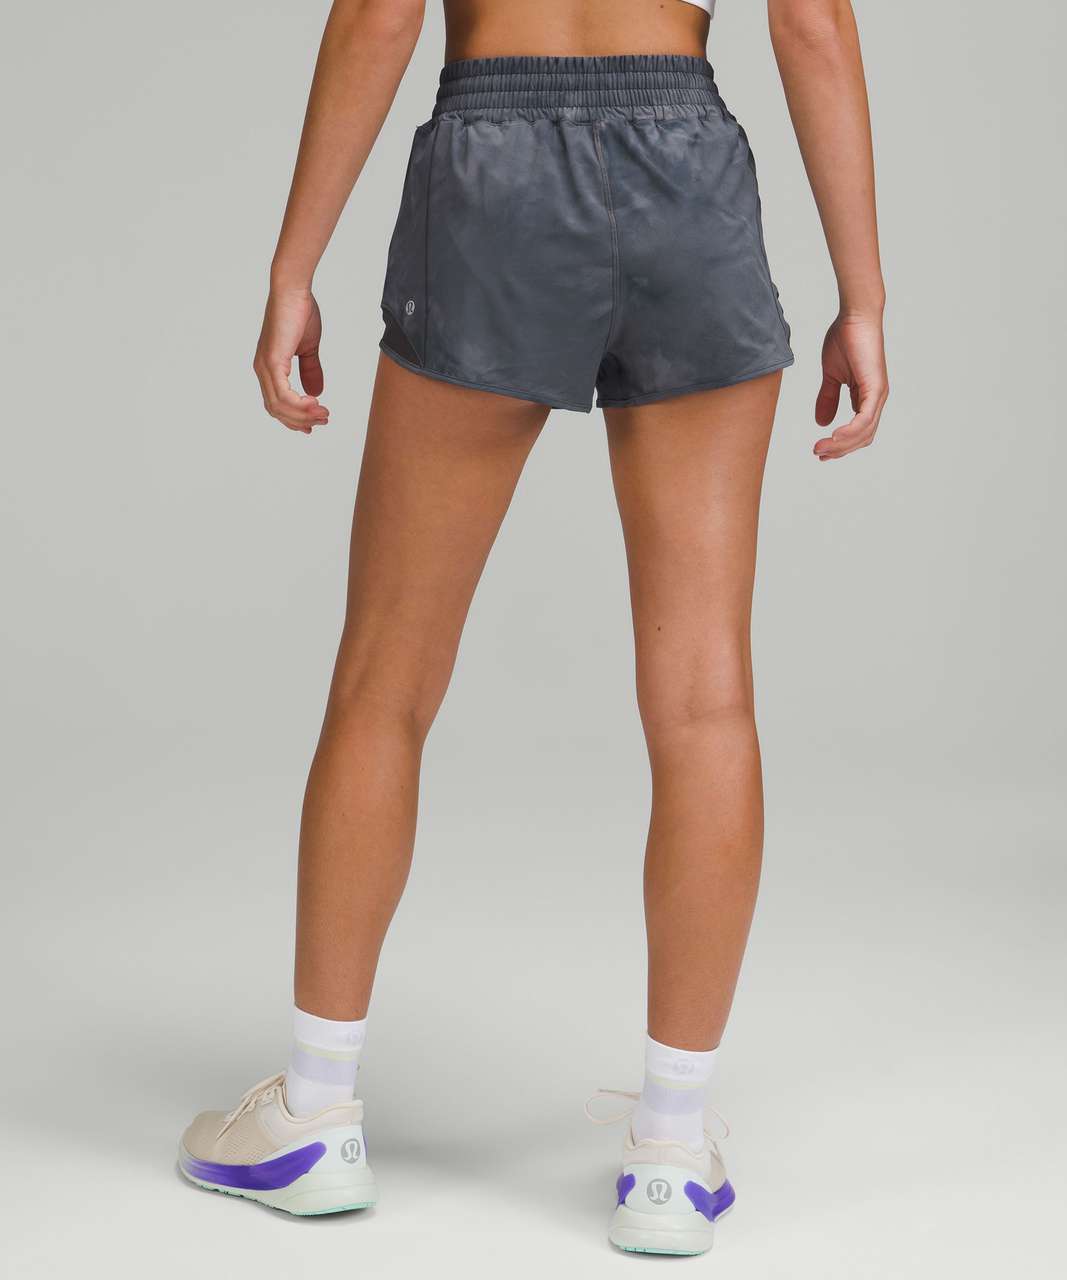 lululemon athletica Hotty Hot High-rise Lined Shorts 2.5 in Gray